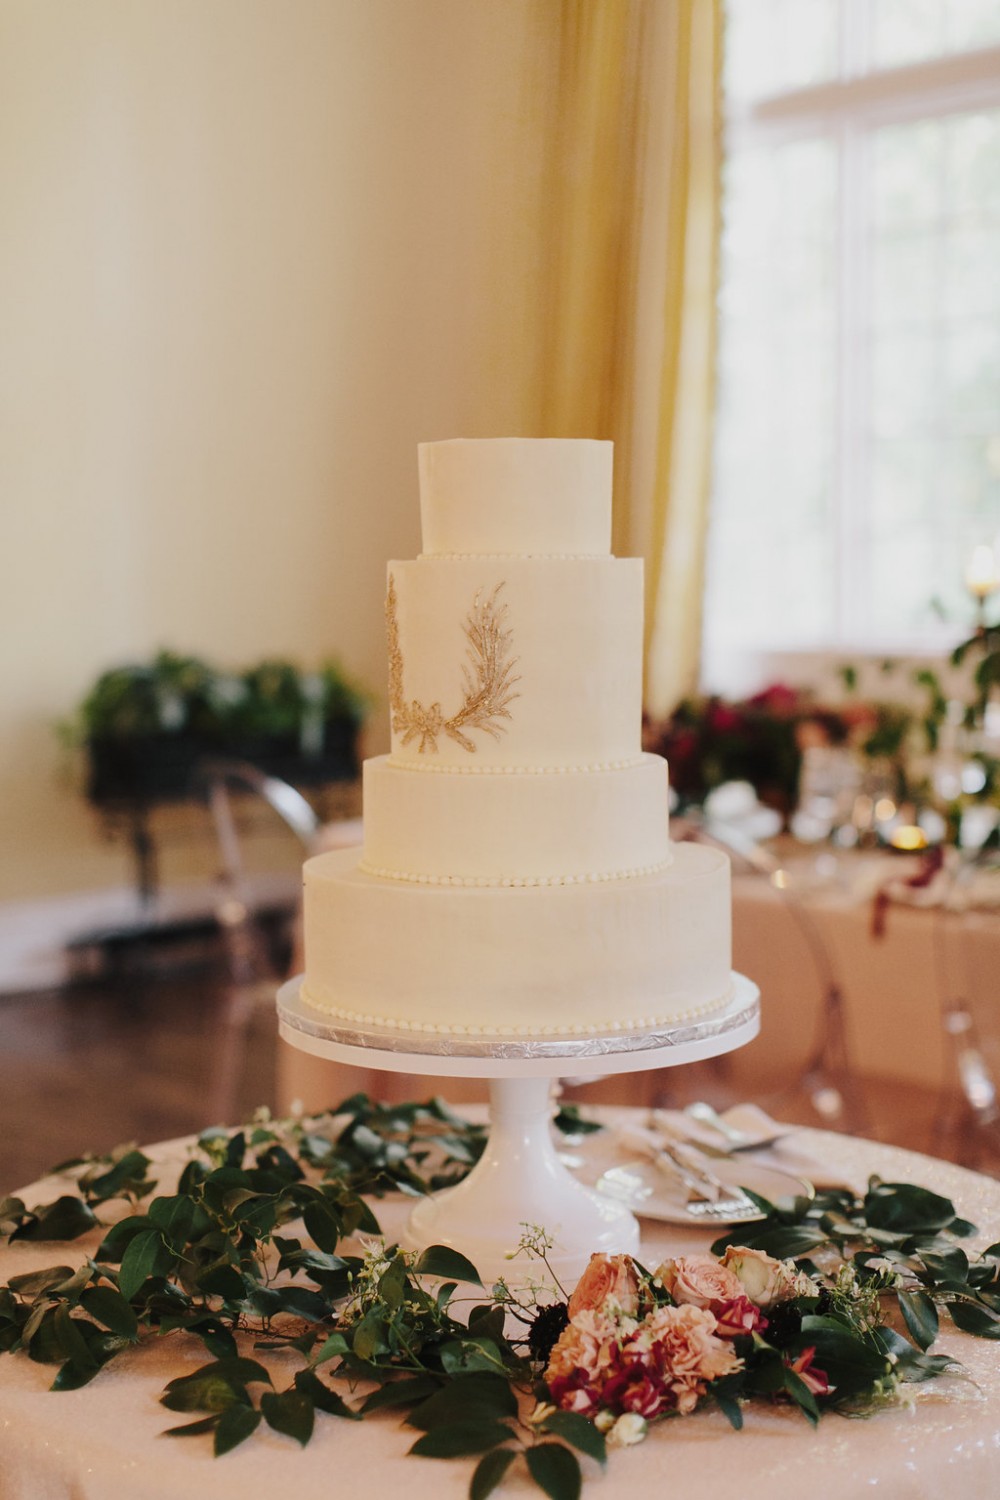 custom-crest-wedding-tiered-cake-autumn wedding in indianapolis on Snippet & Ink